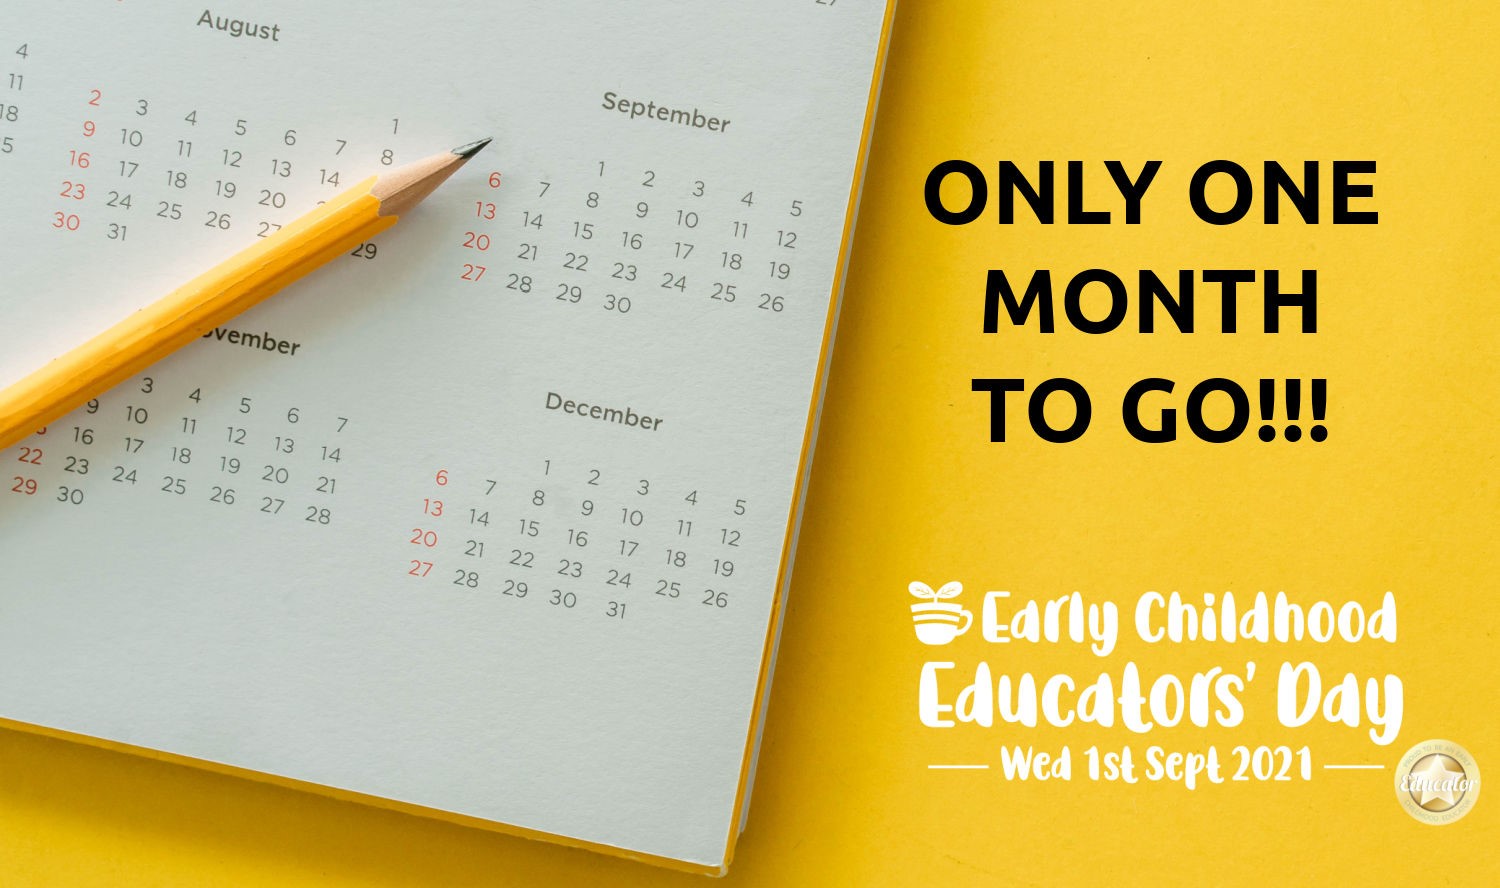 Time to start getting organised for Early Childhood Educators' Day 2021